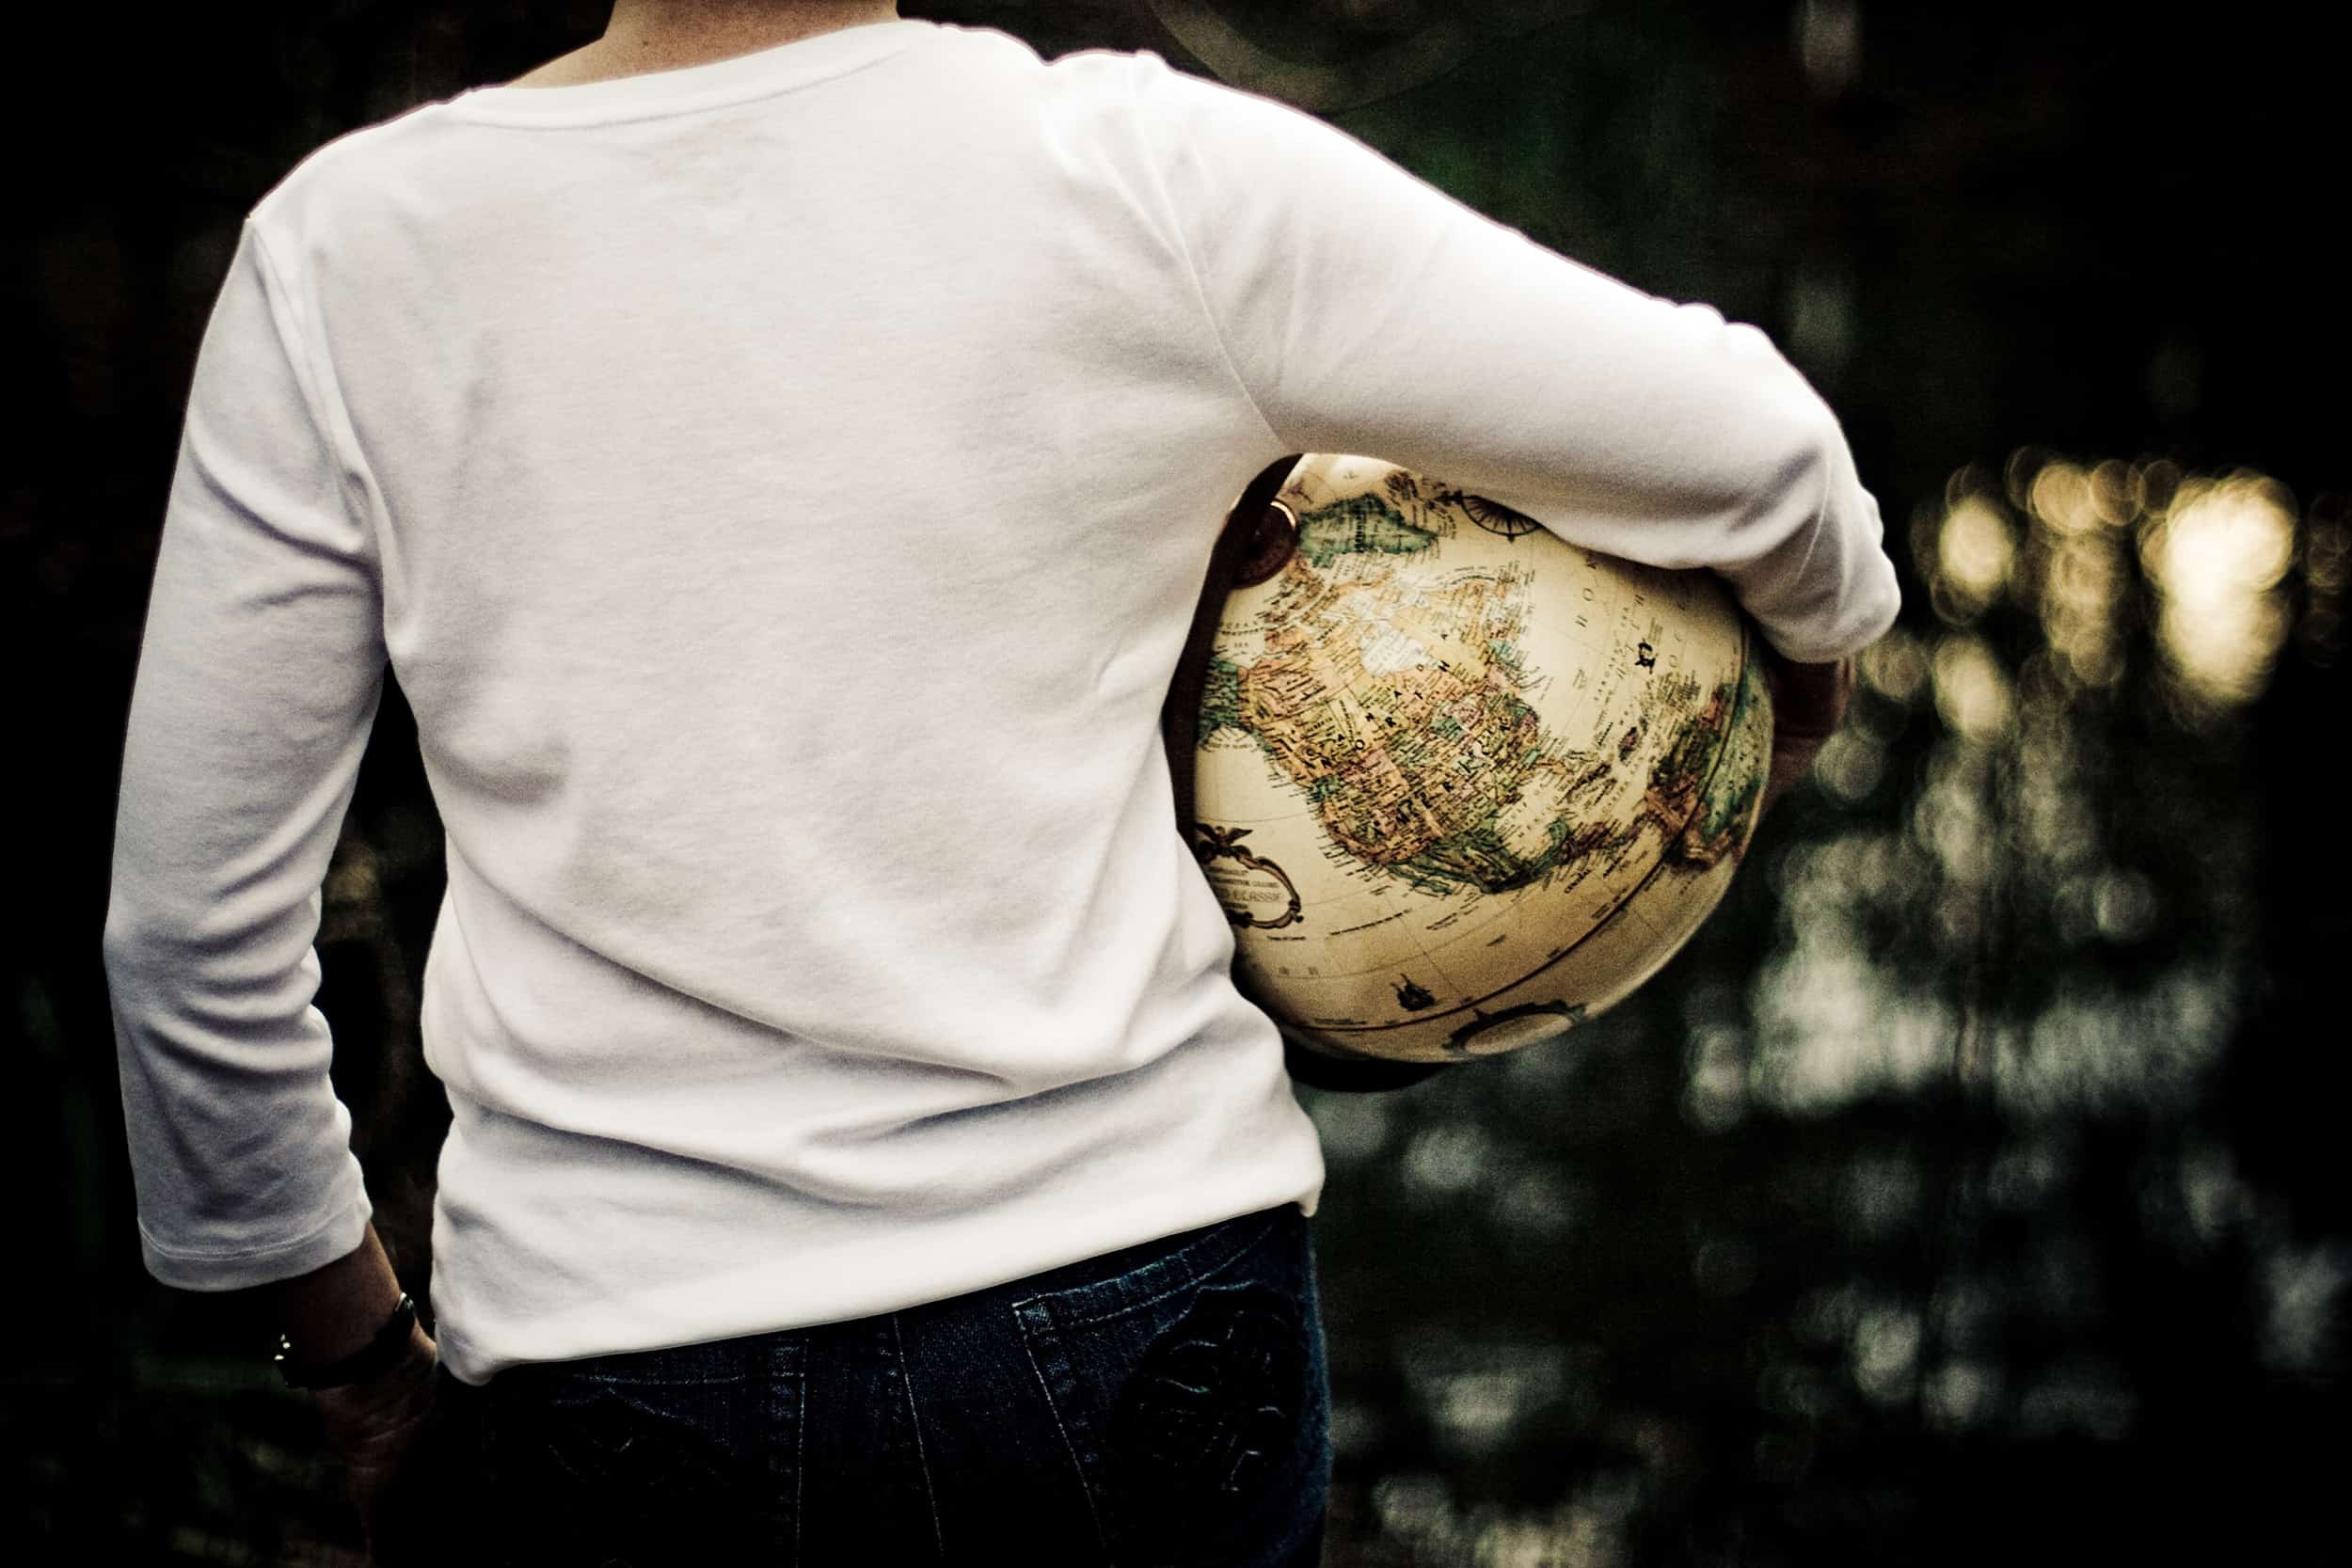 The torso of a person is seen from the back and they are holding a globe under an arm.